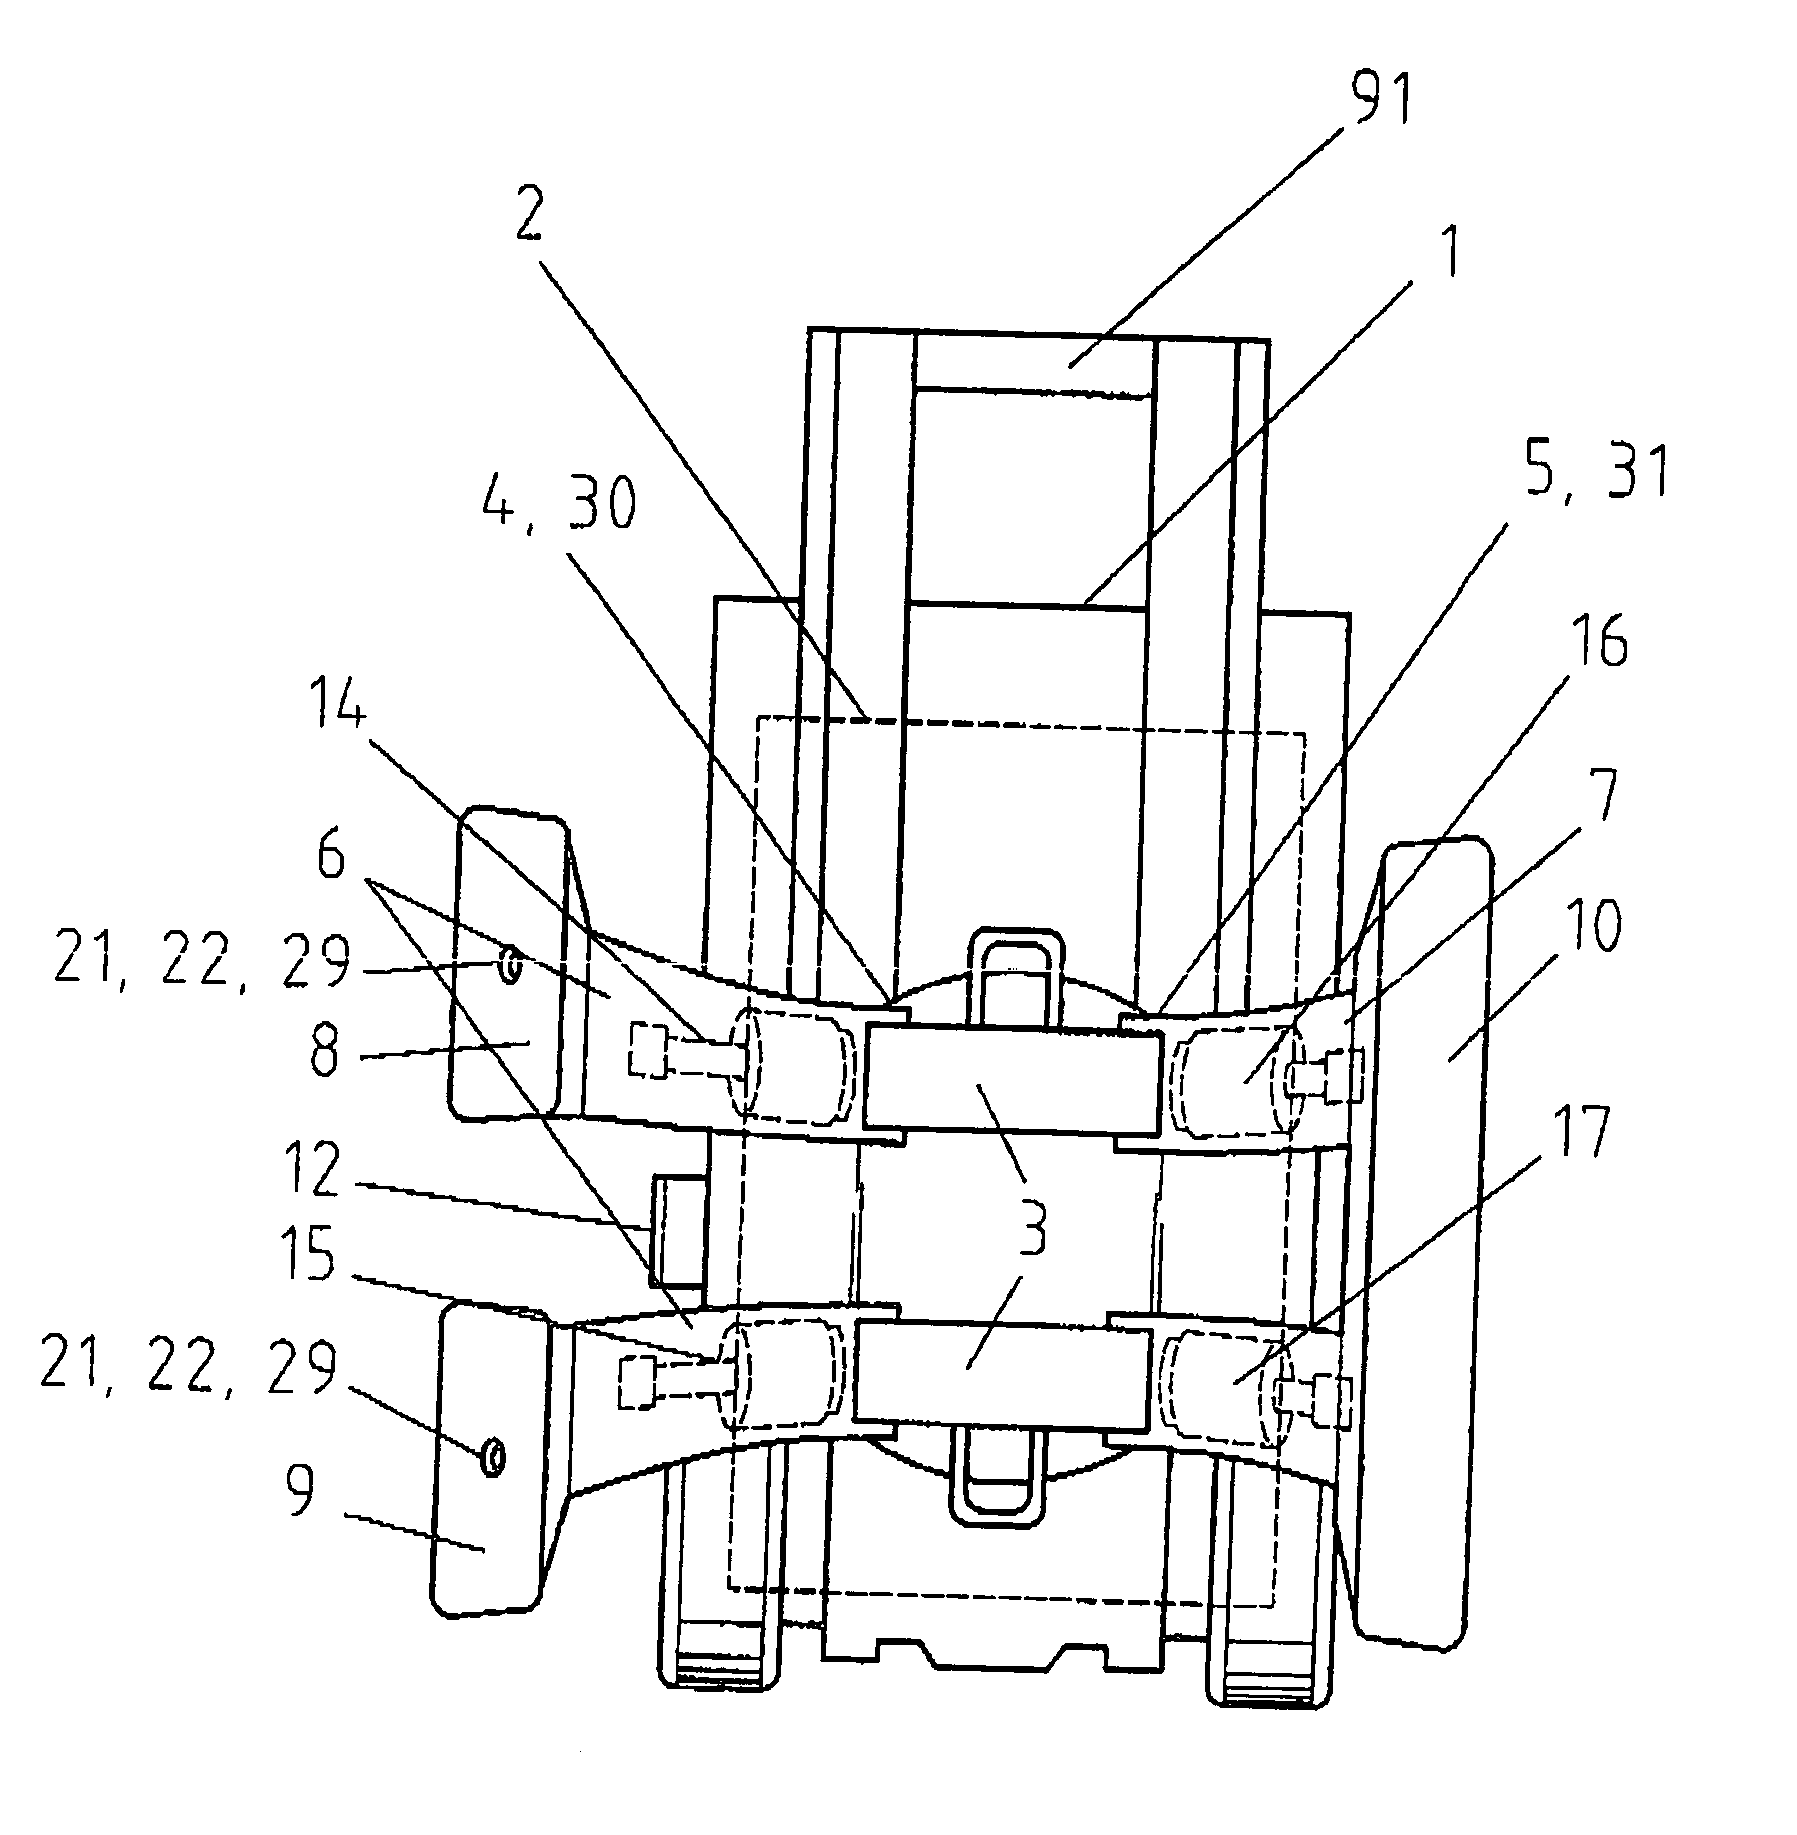 Method and apparatus for handling a load